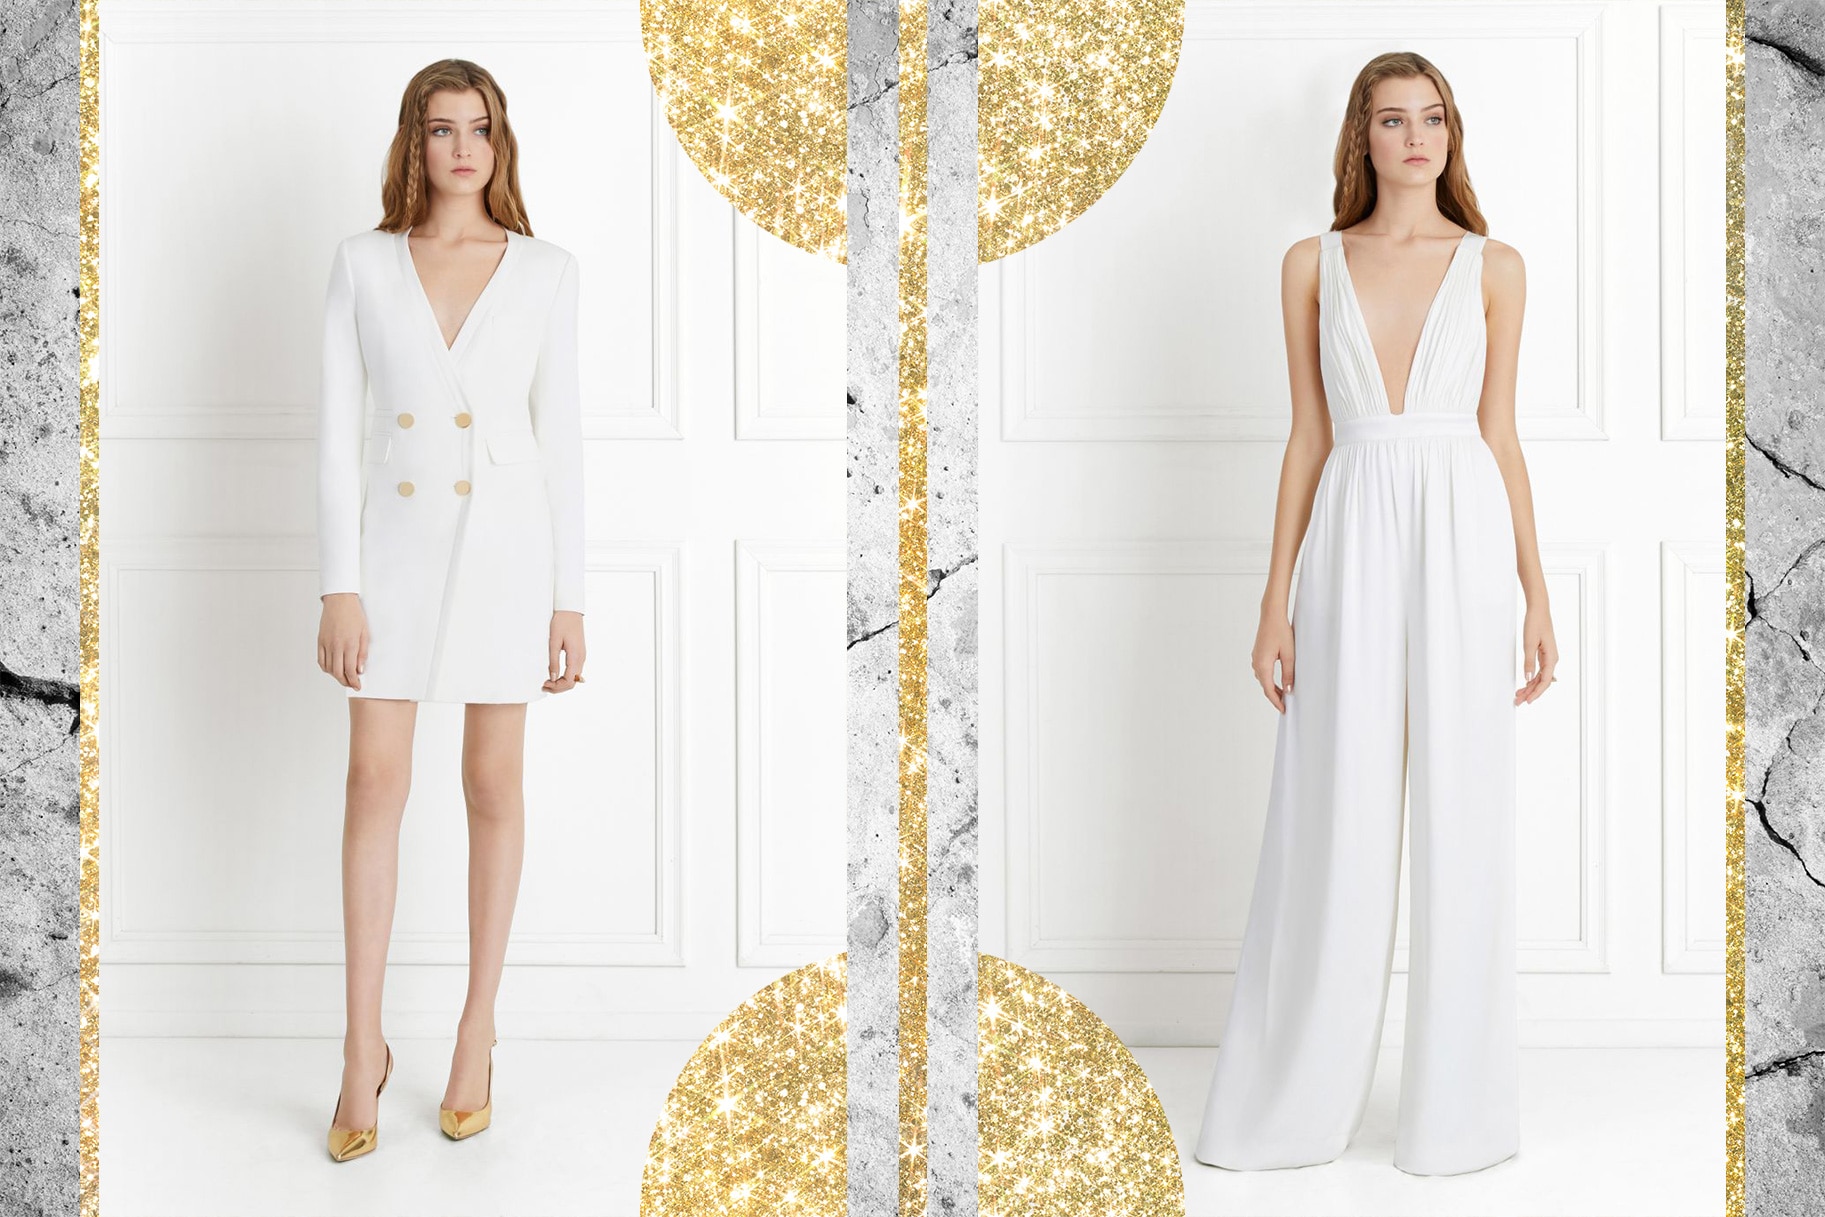 Rachel Zoe's New Bridal Collection Is To Die For